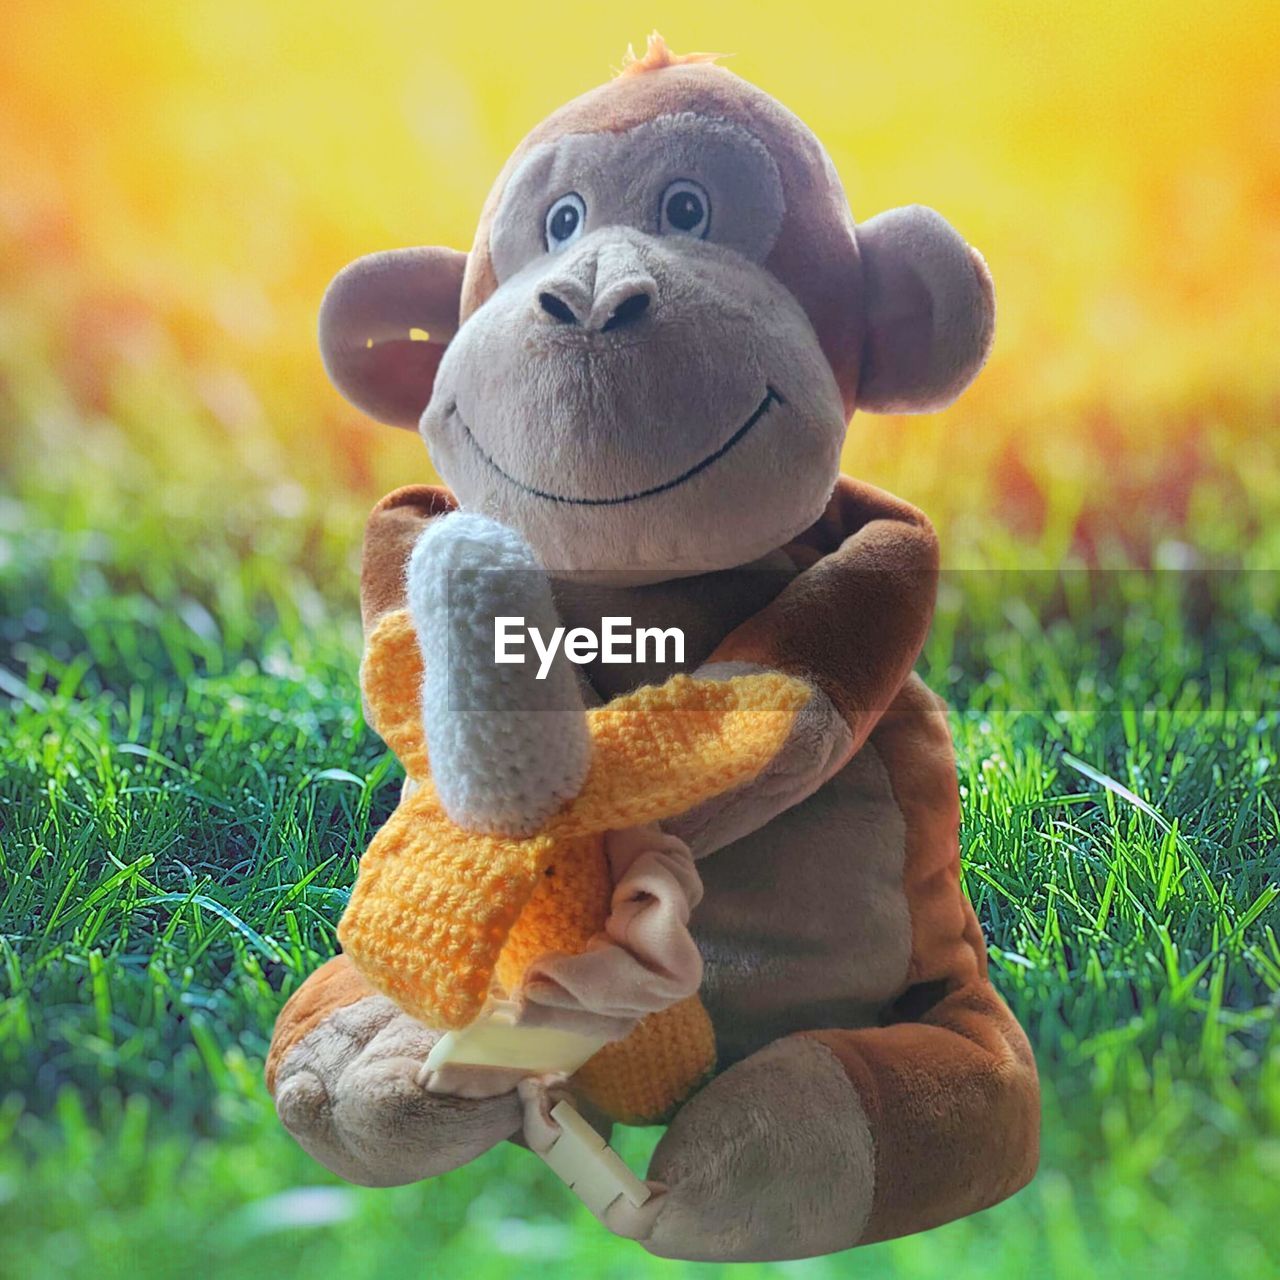 CLOSE-UP OF STUFFED TOY ON GRASS